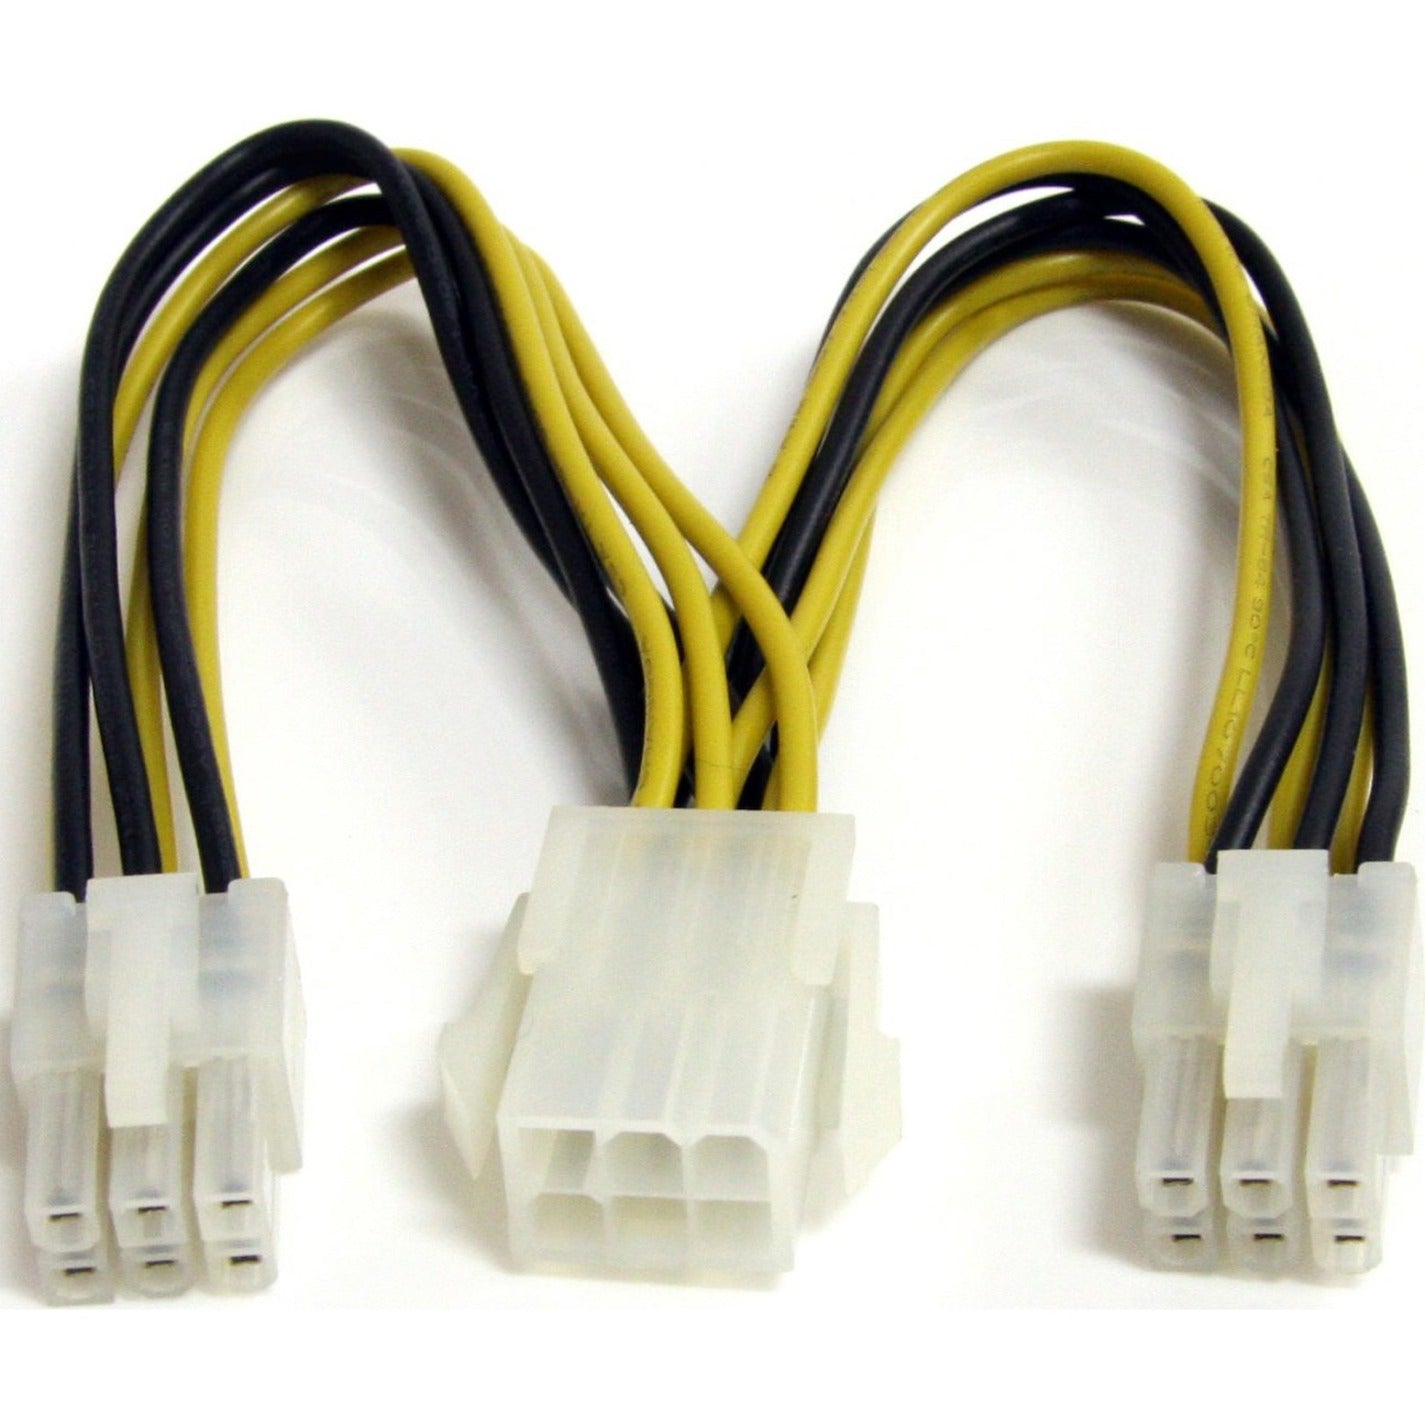 StarTech.com PCIEXSPLIT6 6in PCI Express Power Splitter Cable, Connect Multiple Gaming/Video Cards [Discontinued]